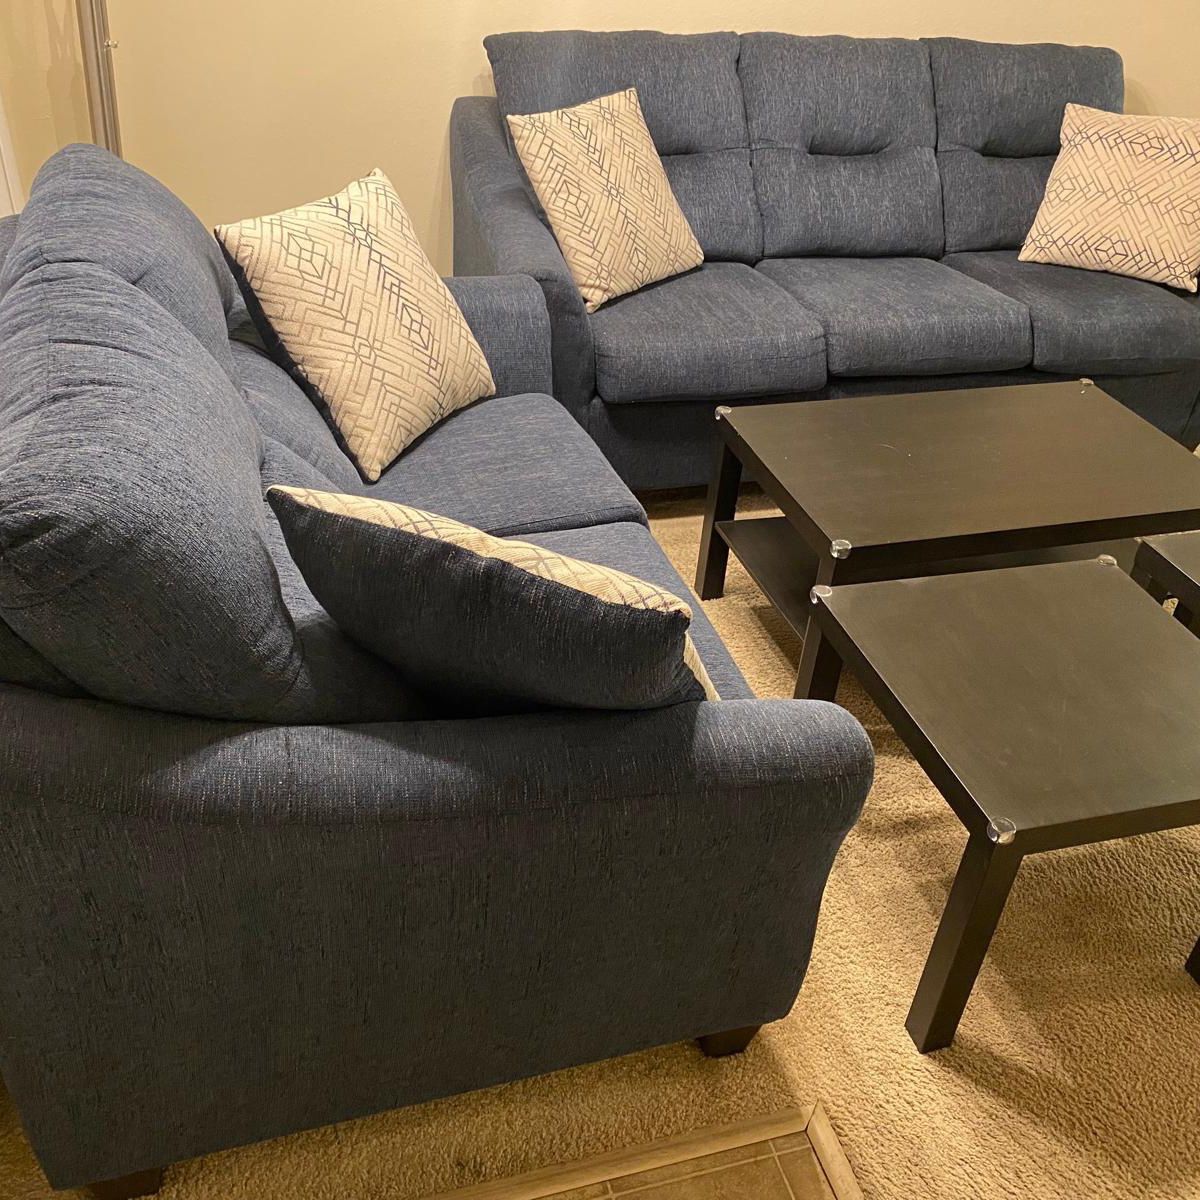 Sofa, Loveseat, Coffee table with Side Tables